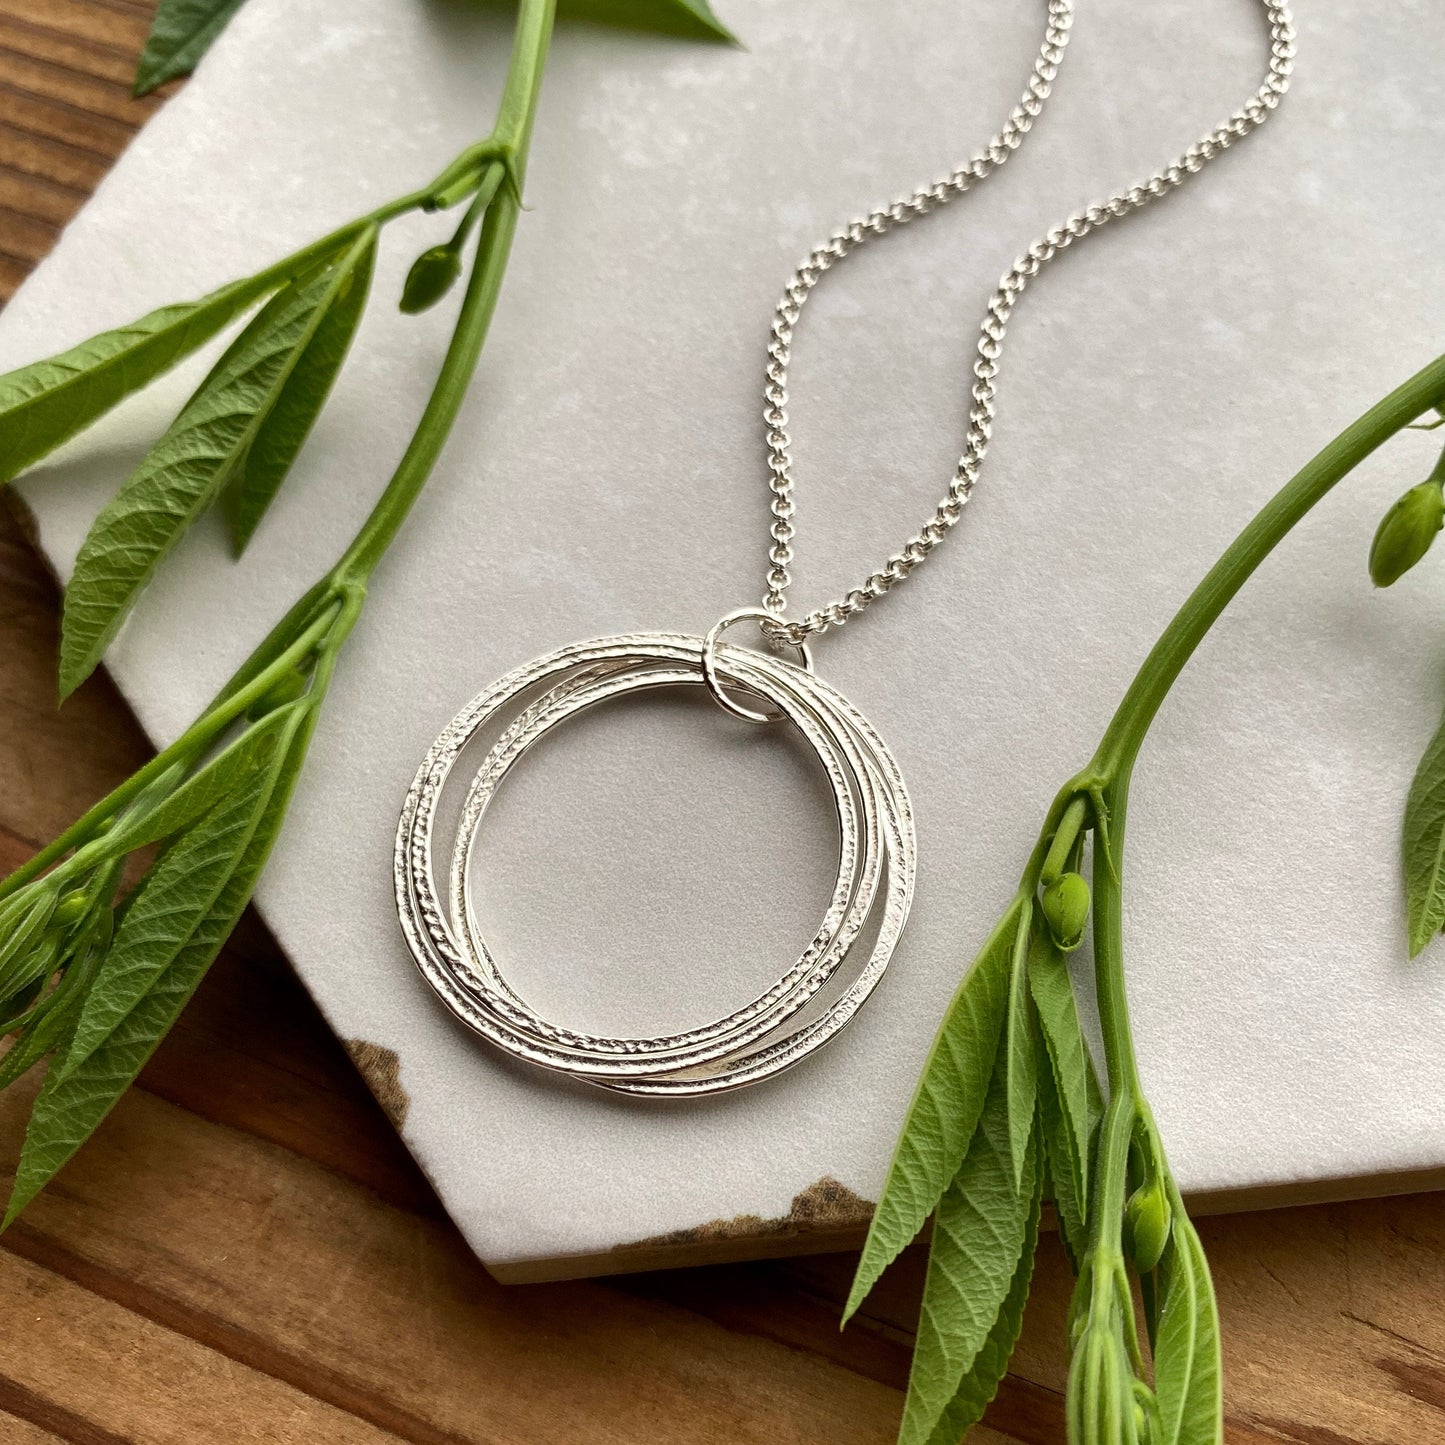 40th Birthday Milestone Necklace, Bold Sterling Silver Sparkly Circles Pendant, 4 Rings for 4 Decades, Large 4 Circle Pendant